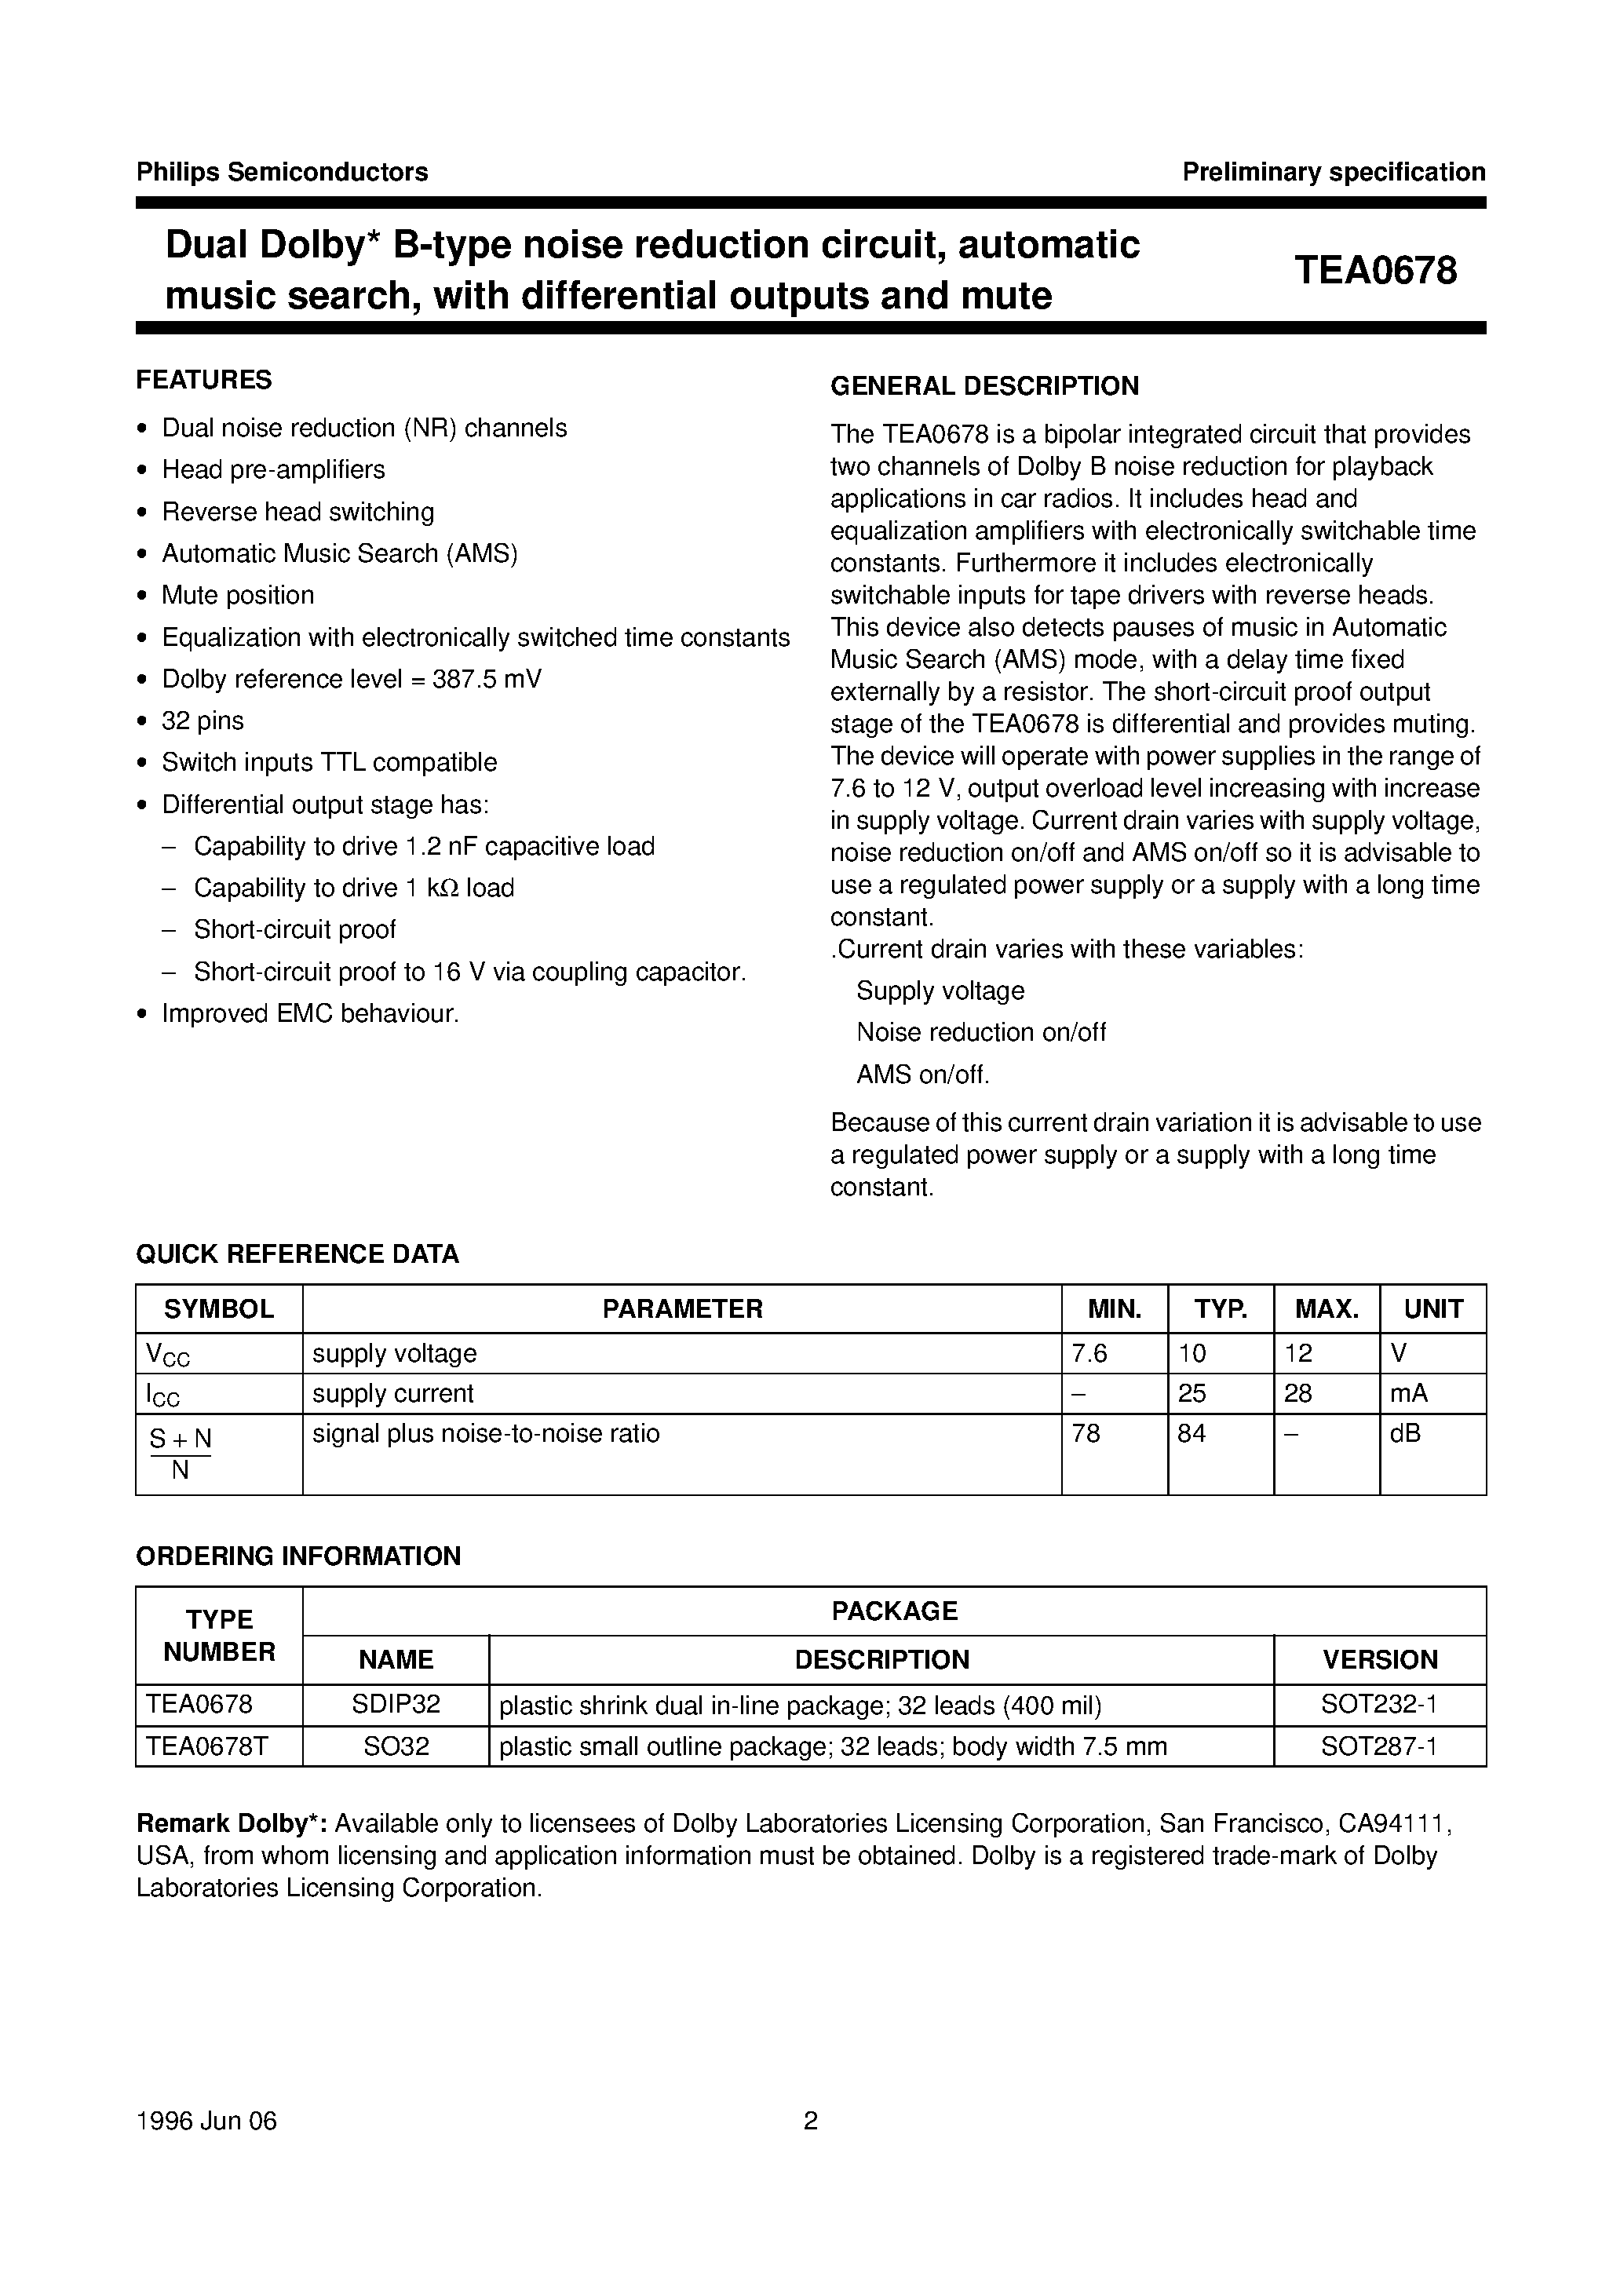 Datasheet TEA0678T - Dual Dolby* B-type noise reduction circuit/ automatic music search/ with differential outputs and mute page 2